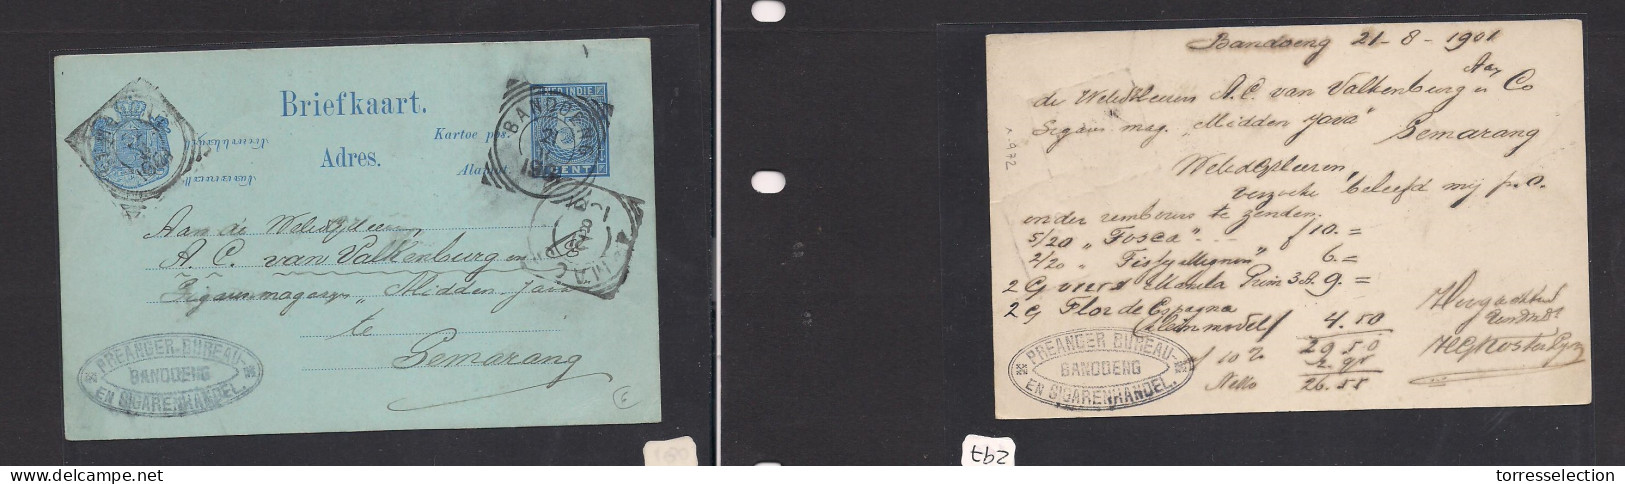 DUTCH INDIES. Dutch Indies - Cover - 1901 Bandoeng To Semarang 5c Blue Stat Card. Easy Deal. - India Holandeses